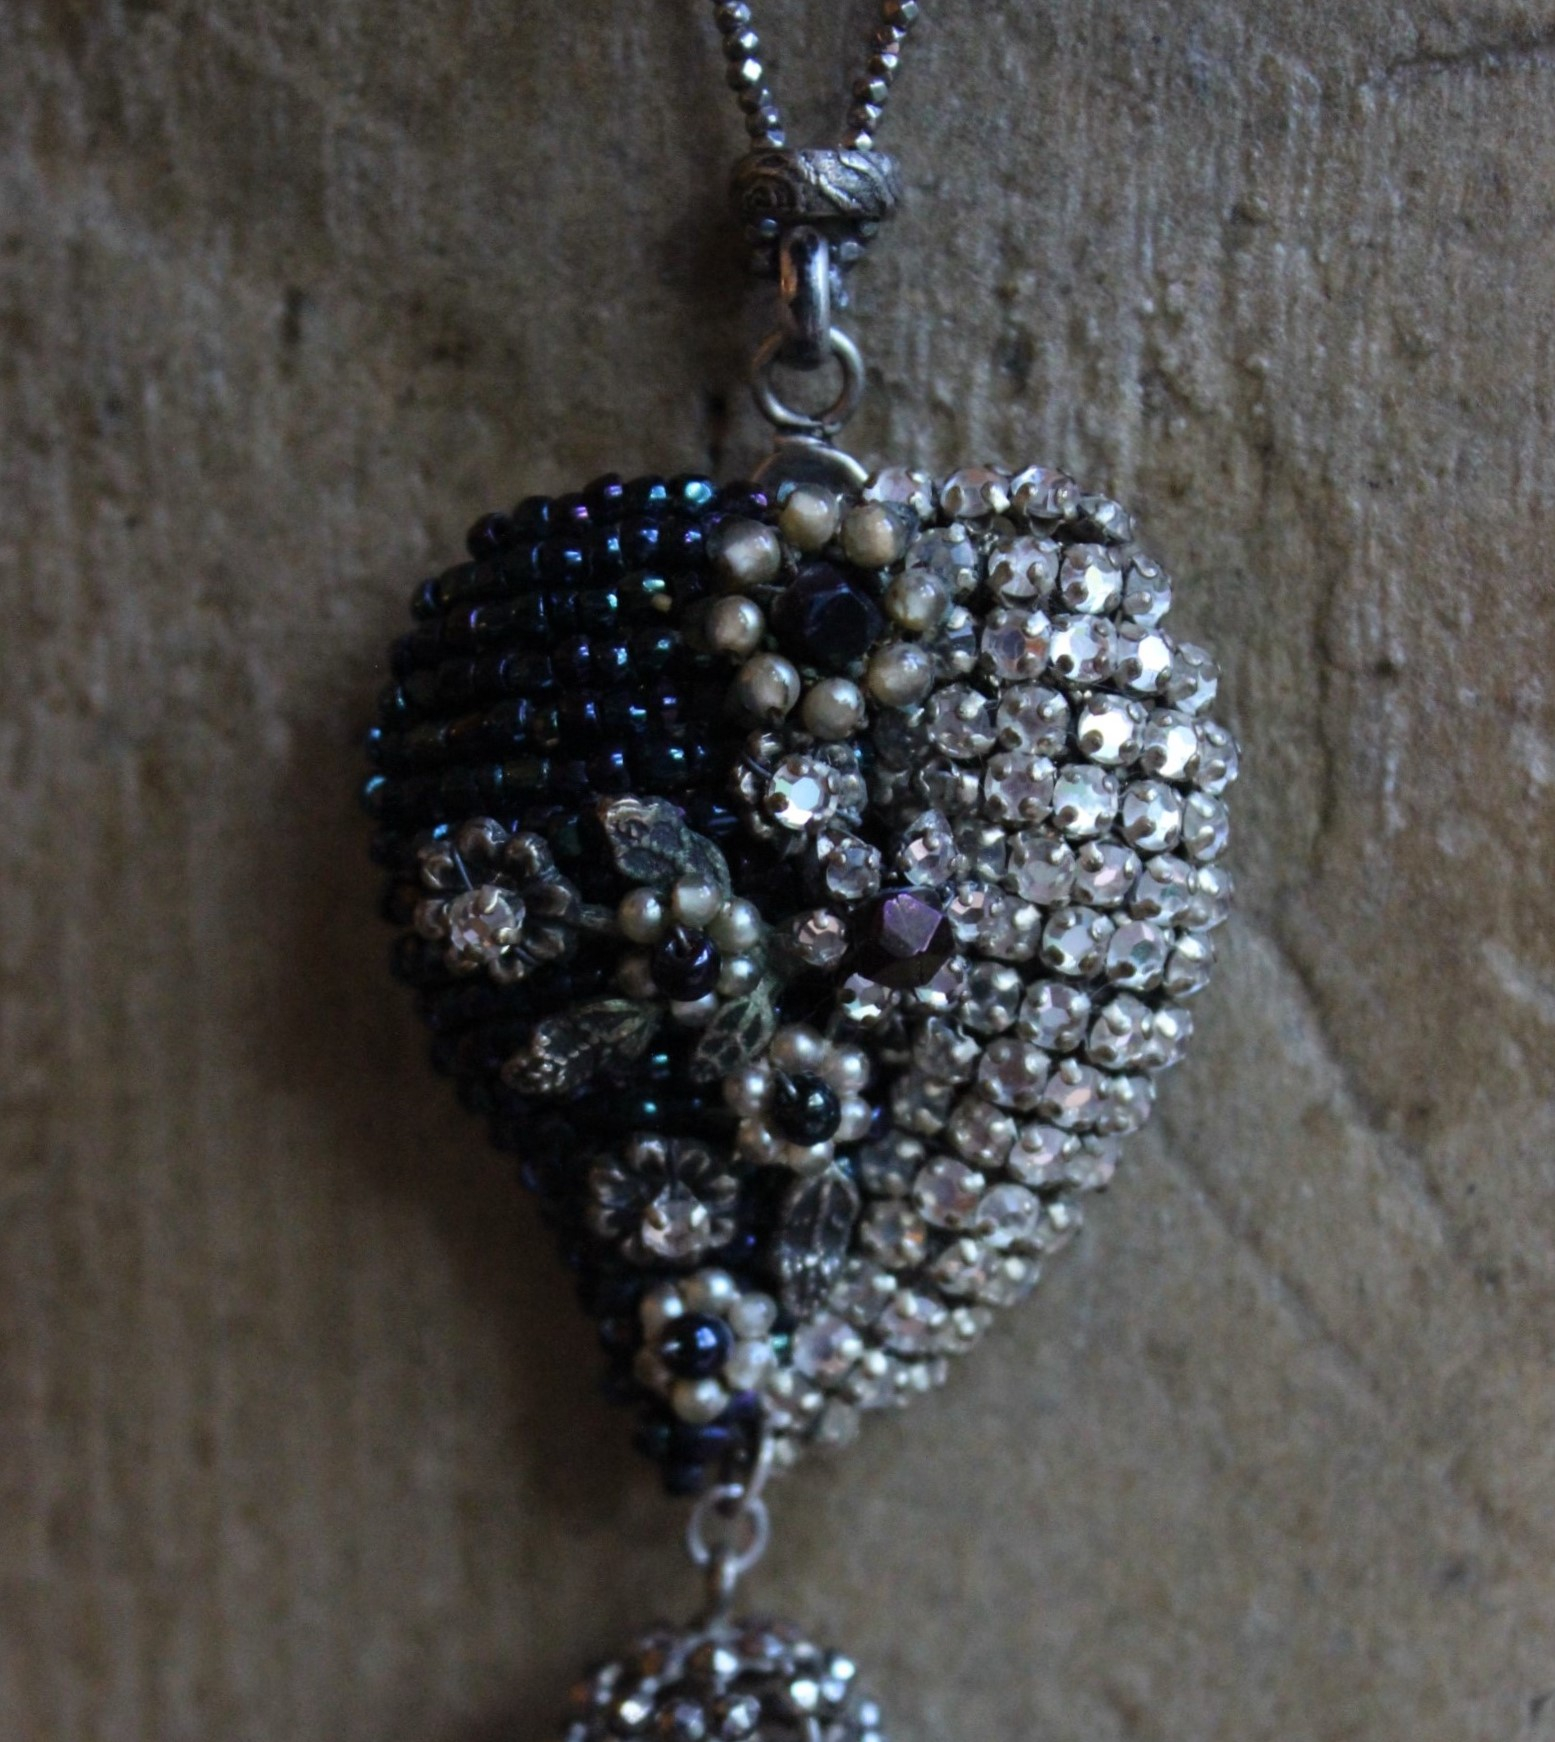 Antique Seed Bead, Pearl and Rhinestone Puffy Heart Necklace with Antique Cut Steel Bead Tassel and Chain